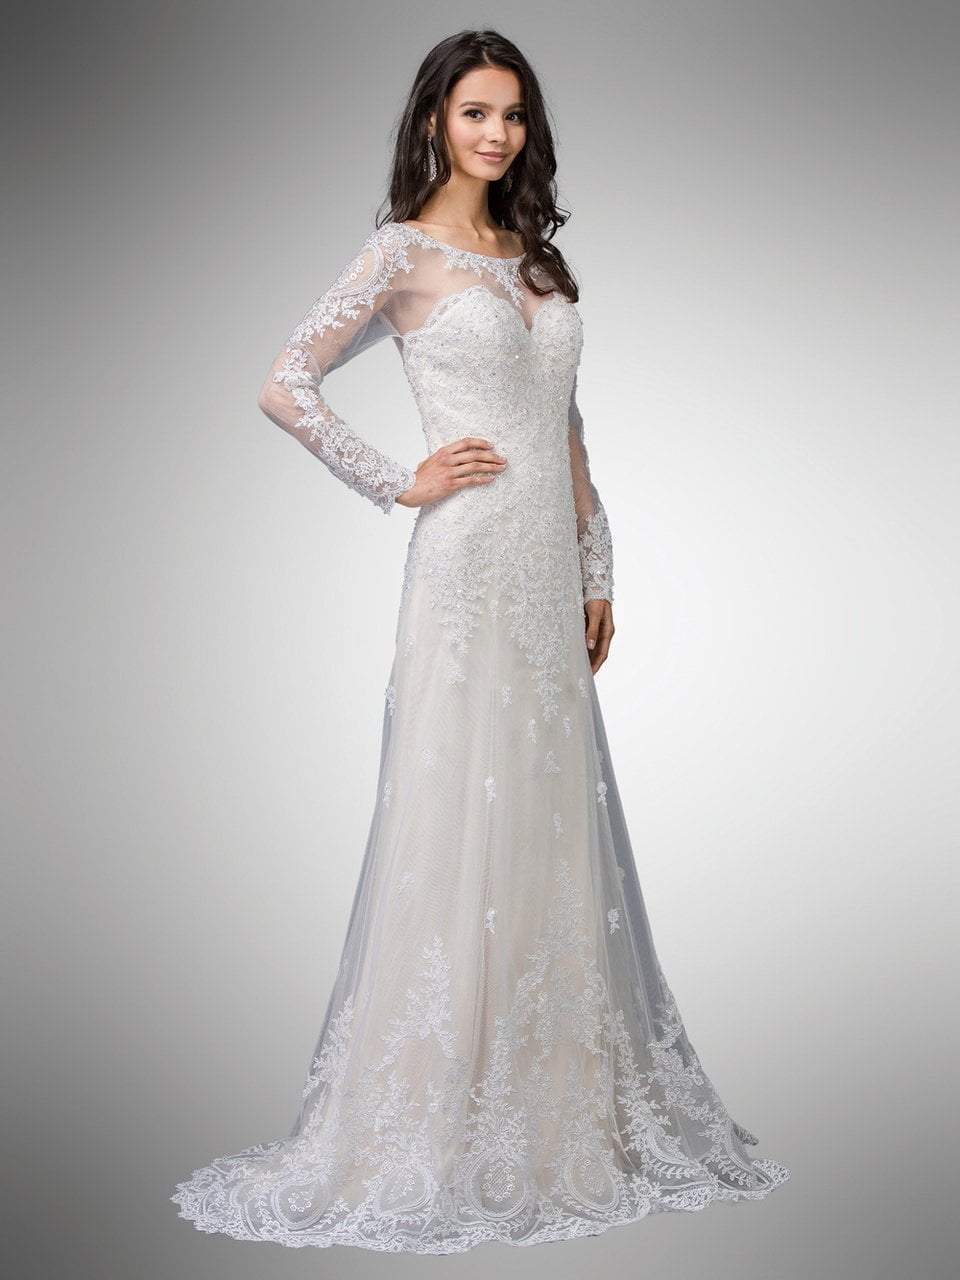 Dancing Queen Bridal - 9 Two Tone Beaded Lace Illusion Bateau A-line G ...